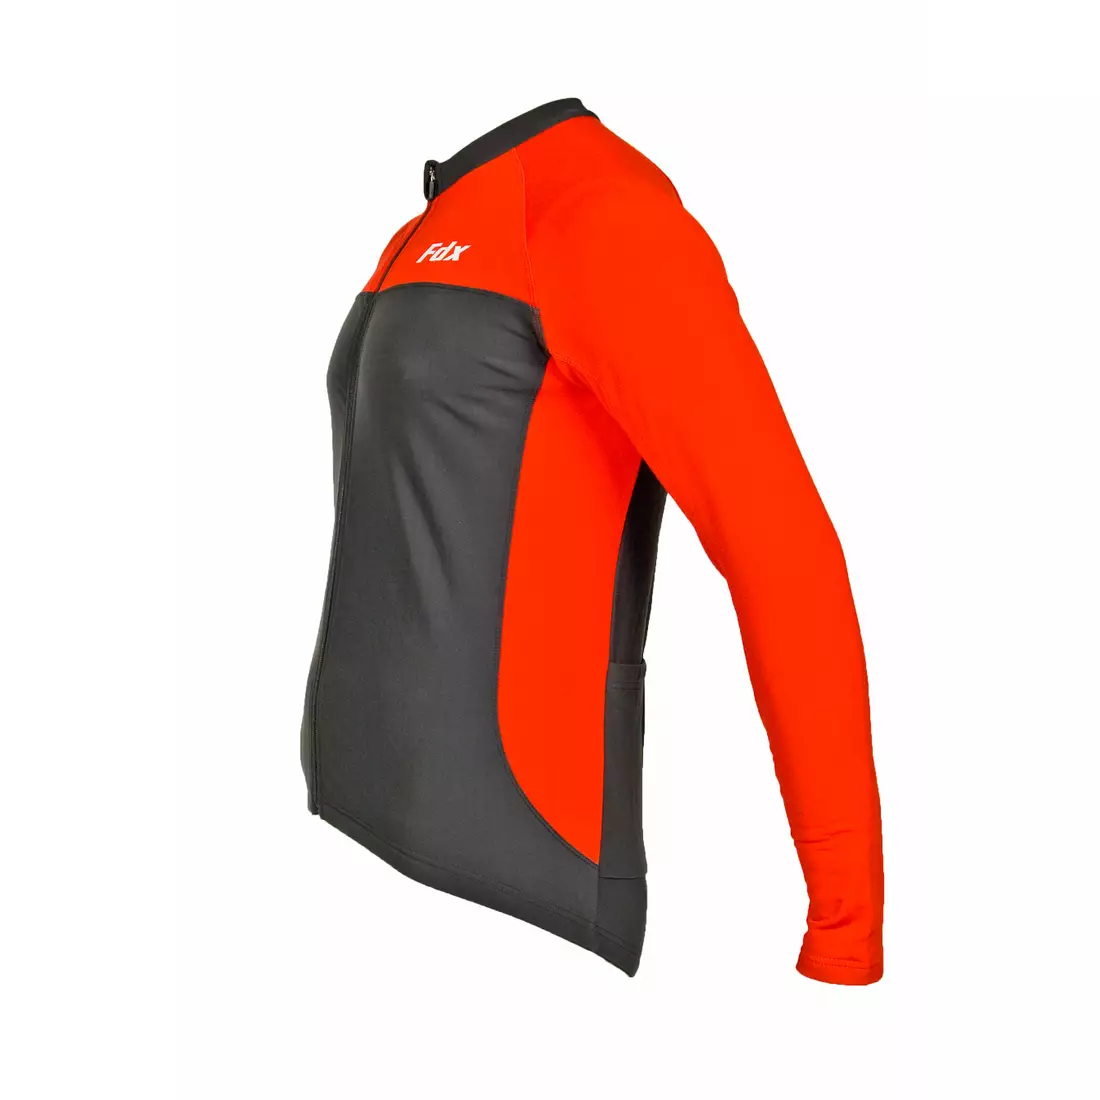 FDX 1280 men's cycling jersey, black and red